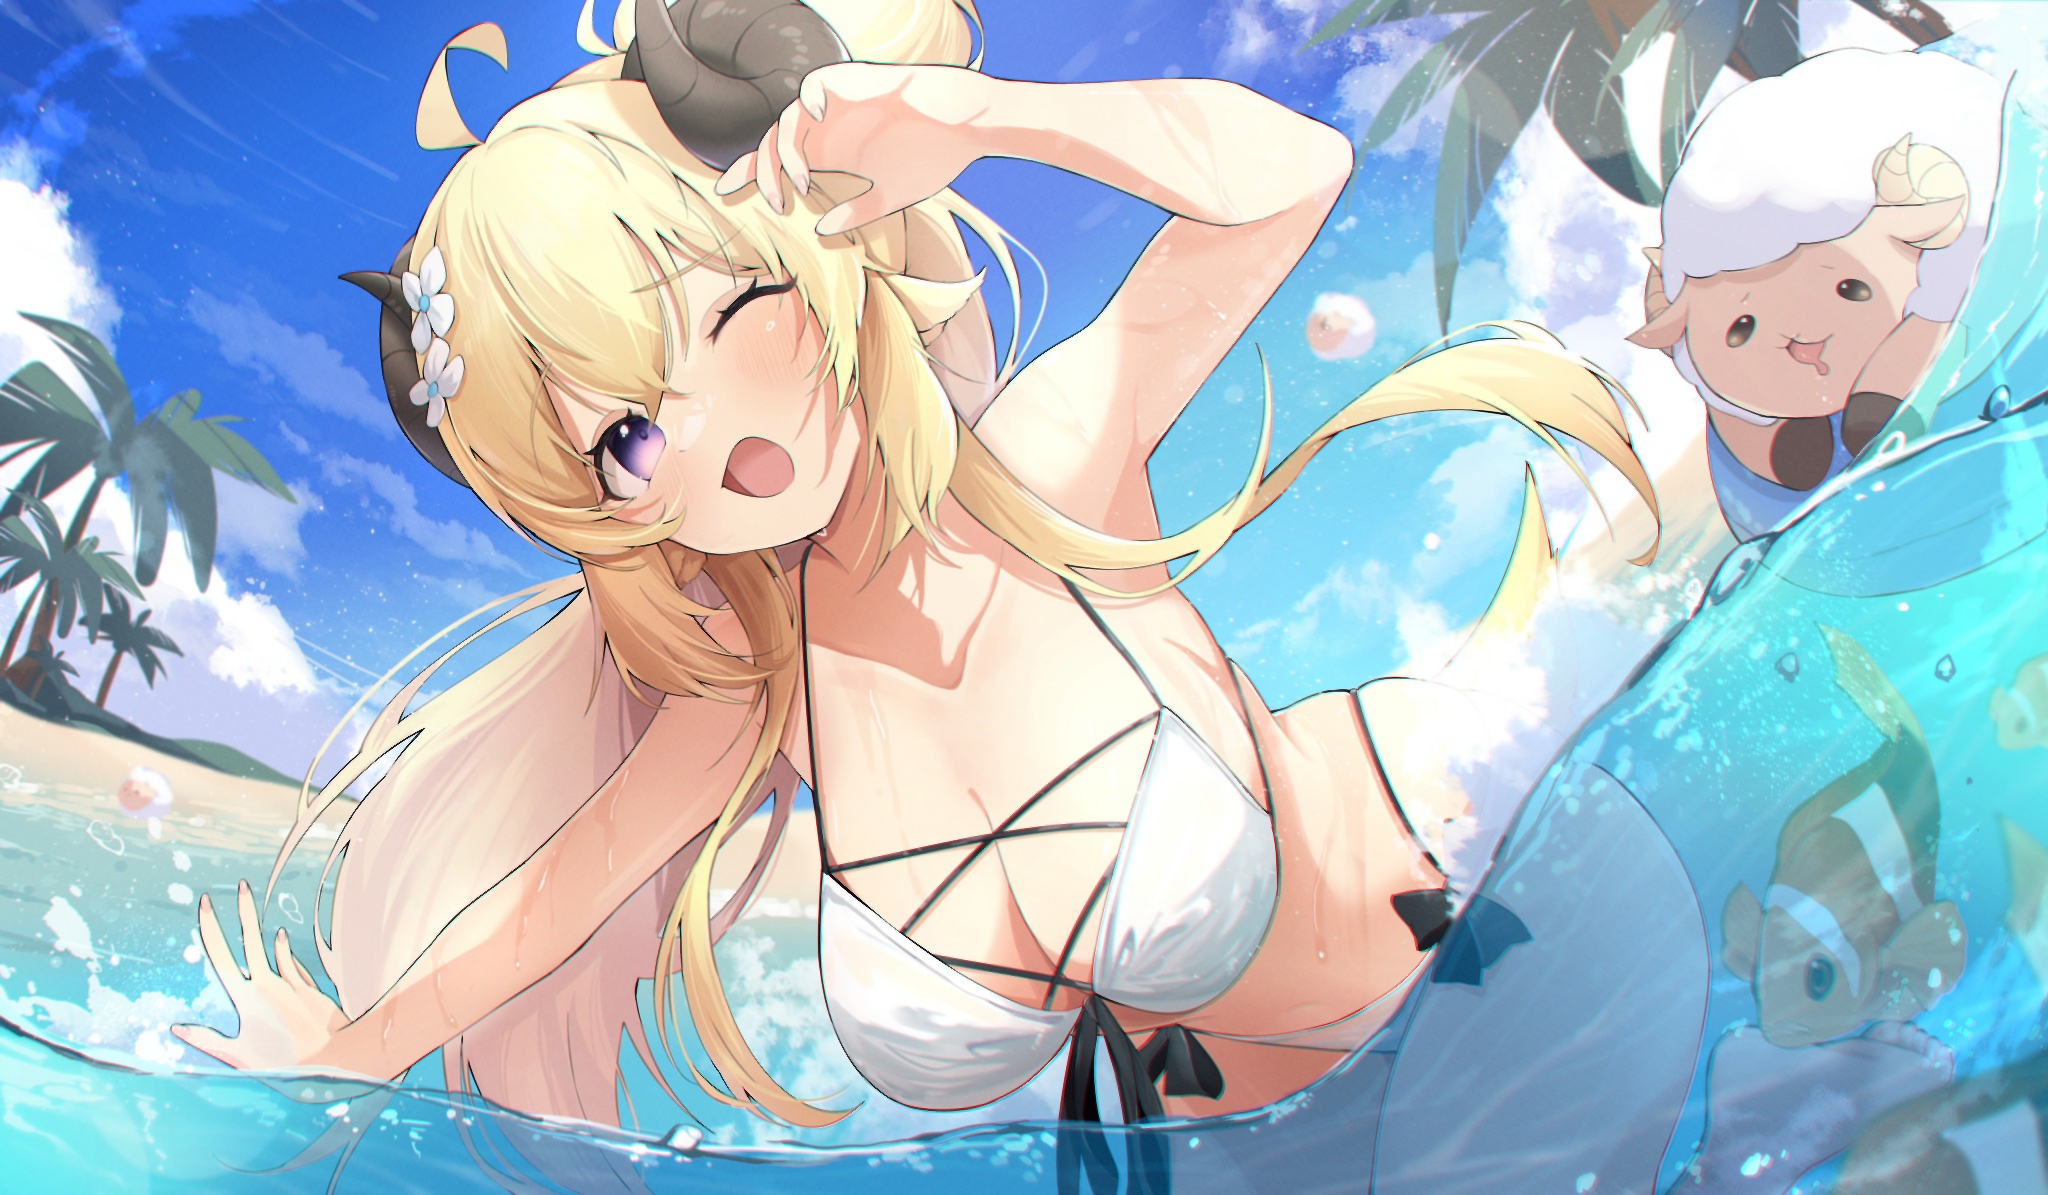 Anime 2048x1195 anime anime girls Tsunomaki Watame Hololive Virtual Youtuber swimwear bikini cleavage big boobs one eye closed sunlight sky clouds palm trees fish animals water floater in water wet wet body flower in hair open mouth horns long hair